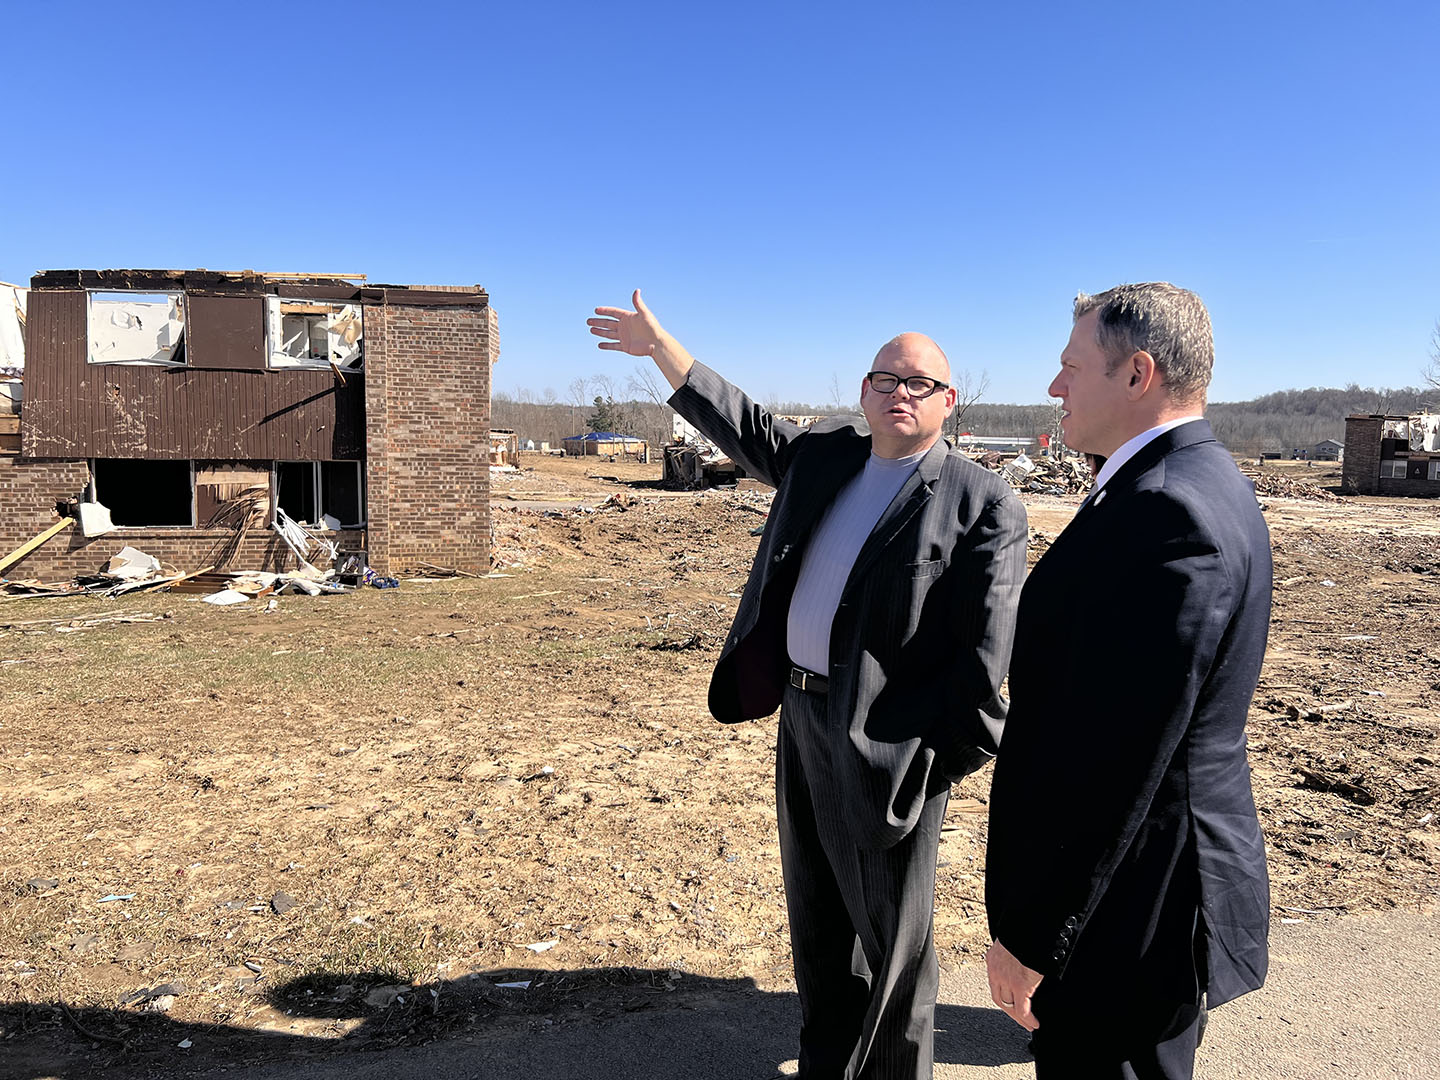 Picture of two men standing outside, with one man pointing toward a destroyed home.